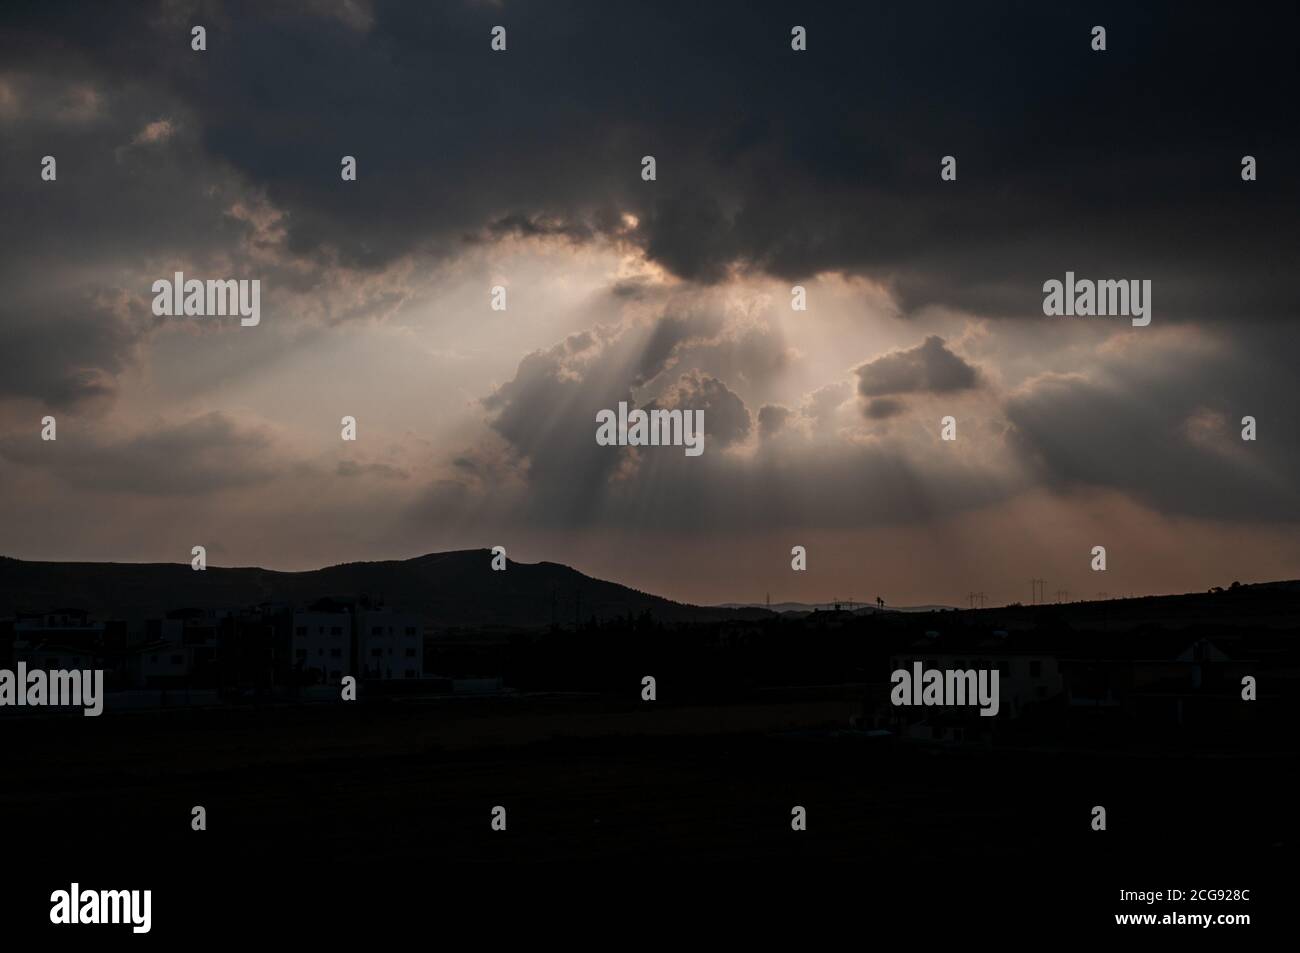 Rays of sunlight breaking through heavy clouds over silhouetted landscape of south eastern Cyprus. Stock Photo